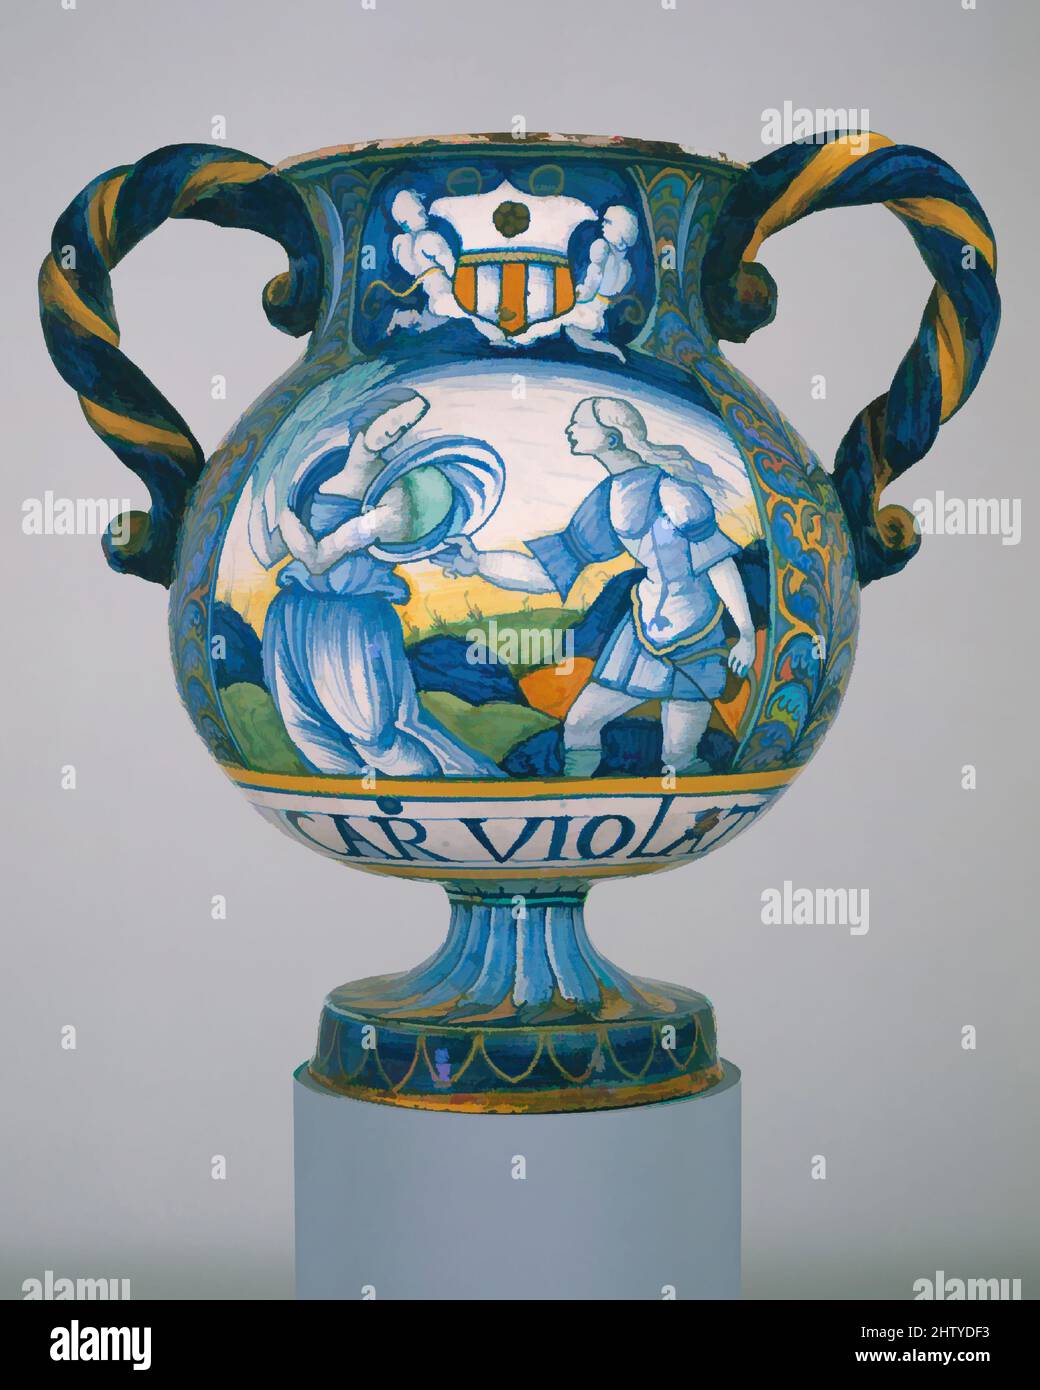 Art inspired by Apothecary Vase (vaso da farmacia), ca. 1515, Italian, Castelli, Maiolica (tin-glazed earthenware), H. 11 7/8 in. (30.2 cm), Ceramics-Pottery, Classic works modernized by Artotop with a splash of modernity. Shapes, color and value, eye-catching visual impact on art. Emotions through freedom of artworks in a contemporary way. A timeless message pursuing a wildly creative new direction. Artists turning to the digital medium and creating the Artotop NFT Stock Photo